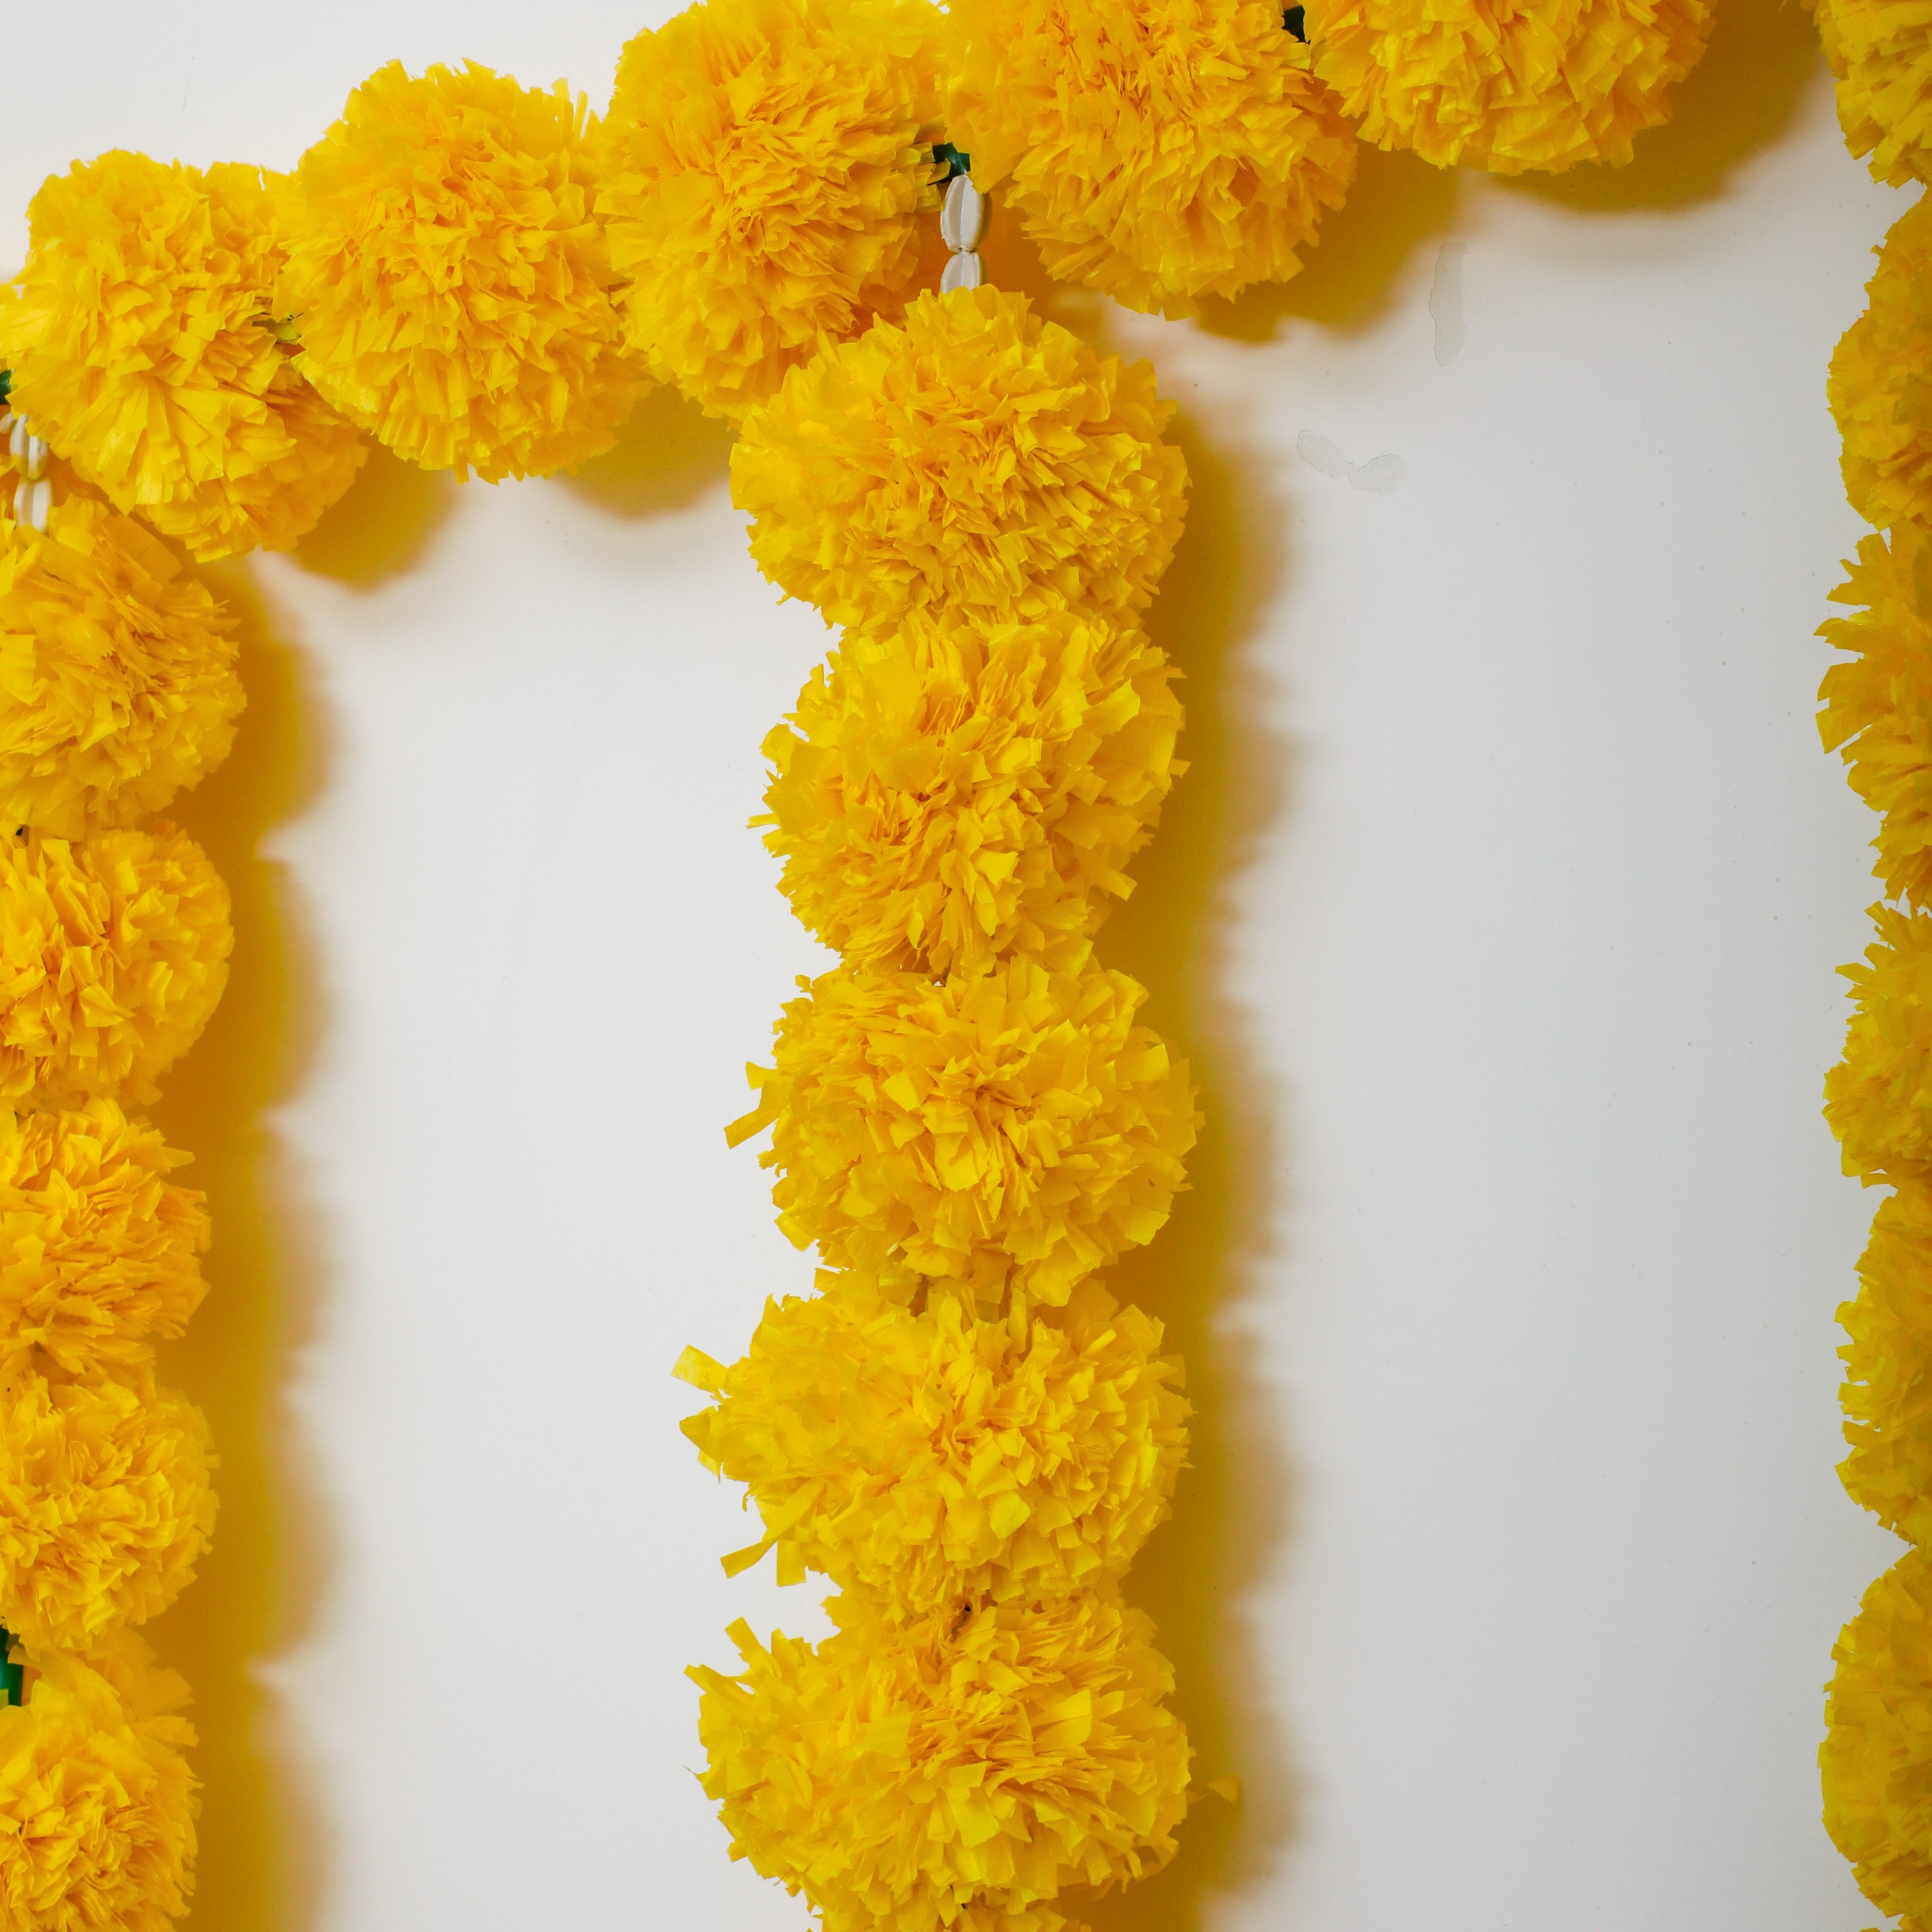 Vibrant Yellow Toran adorned with Marigold Flowers - Traditional Indian Home Decor for Festive Ambiance